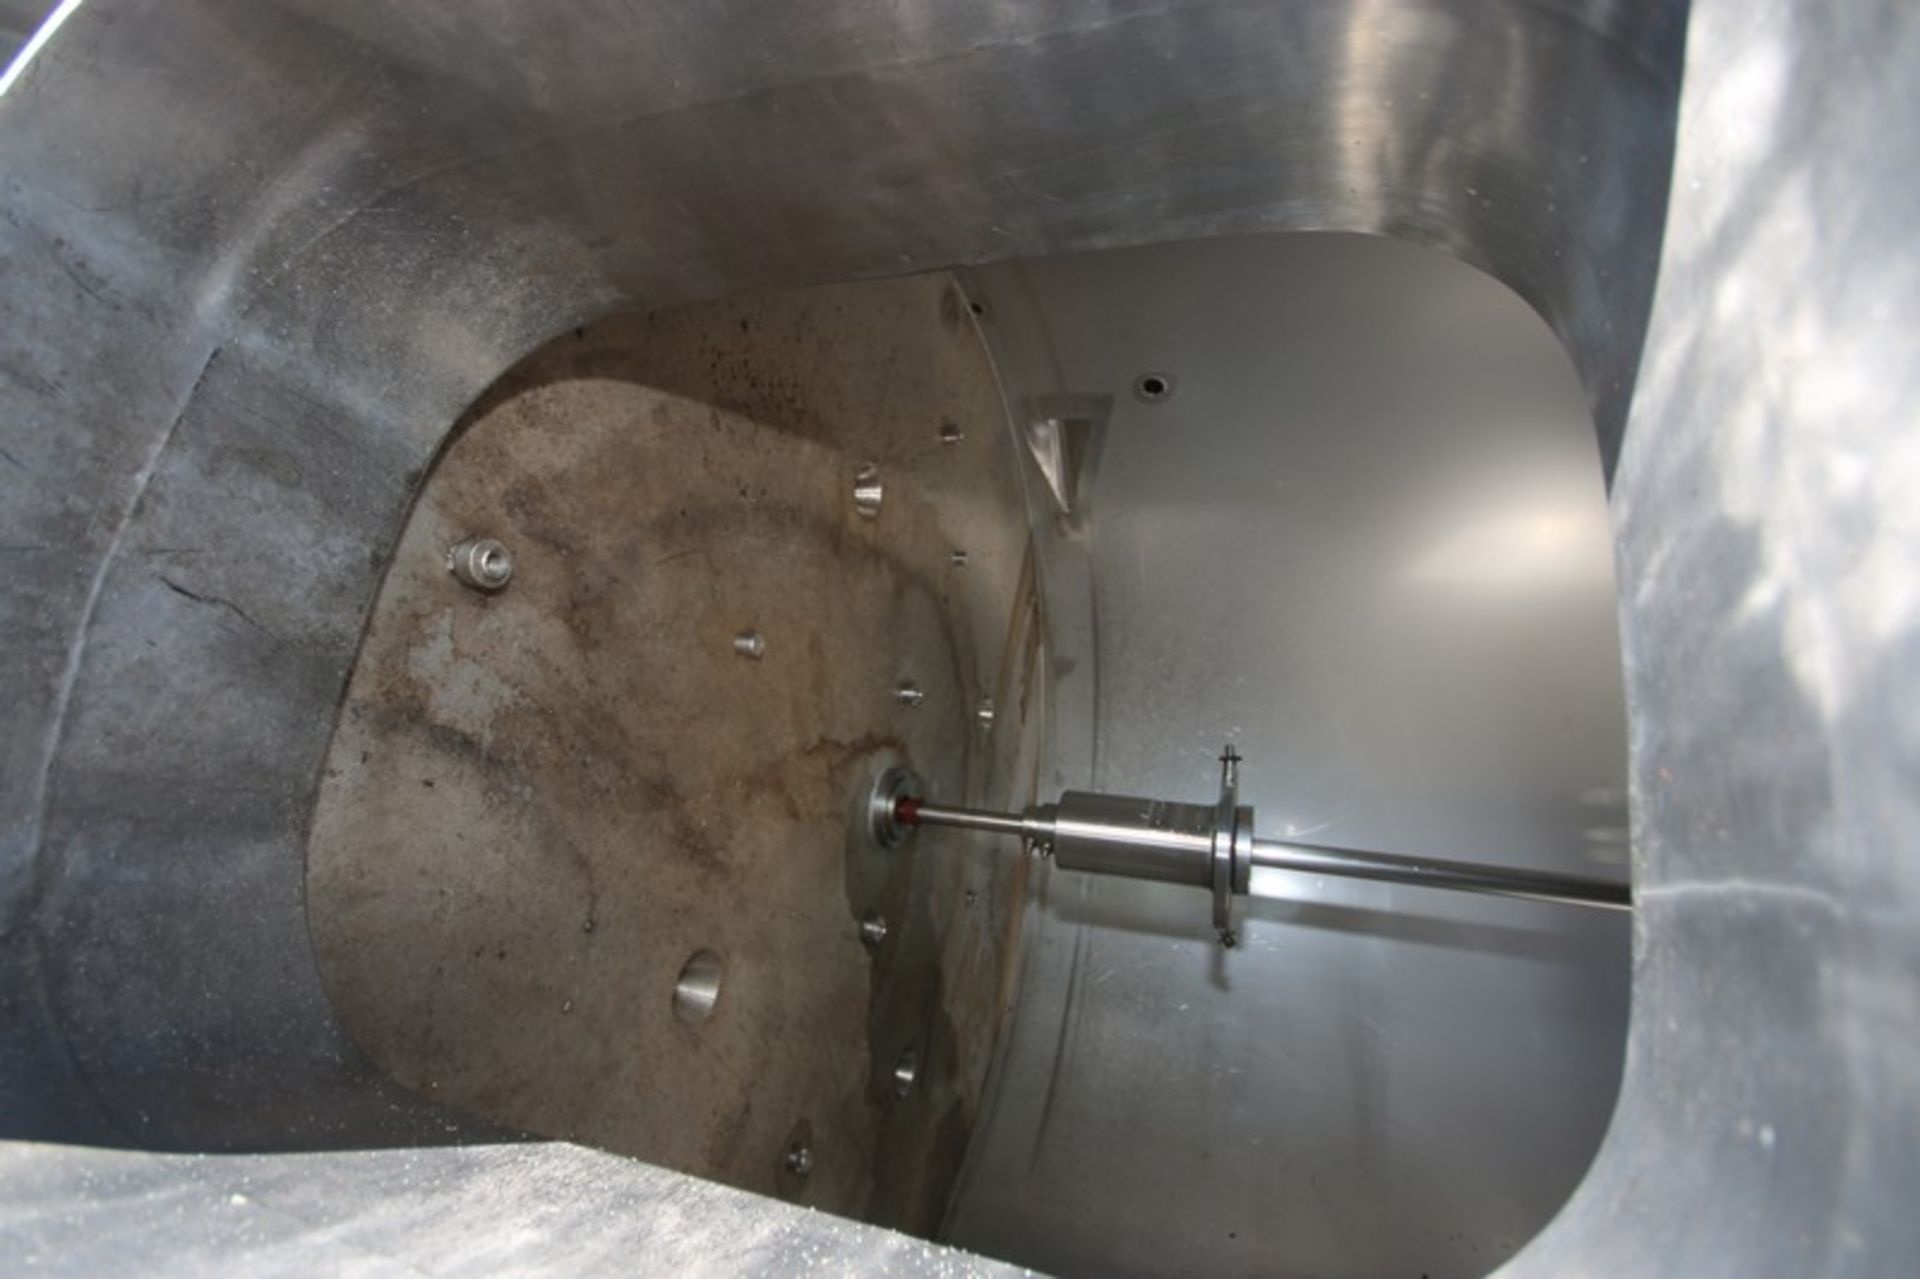 Munker/Braulogistik 15hL Combination Mash Tun/Kettle, M/N Brewhouse, S/N 1, 208 Volts, 3 Phase, with - Image 9 of 24